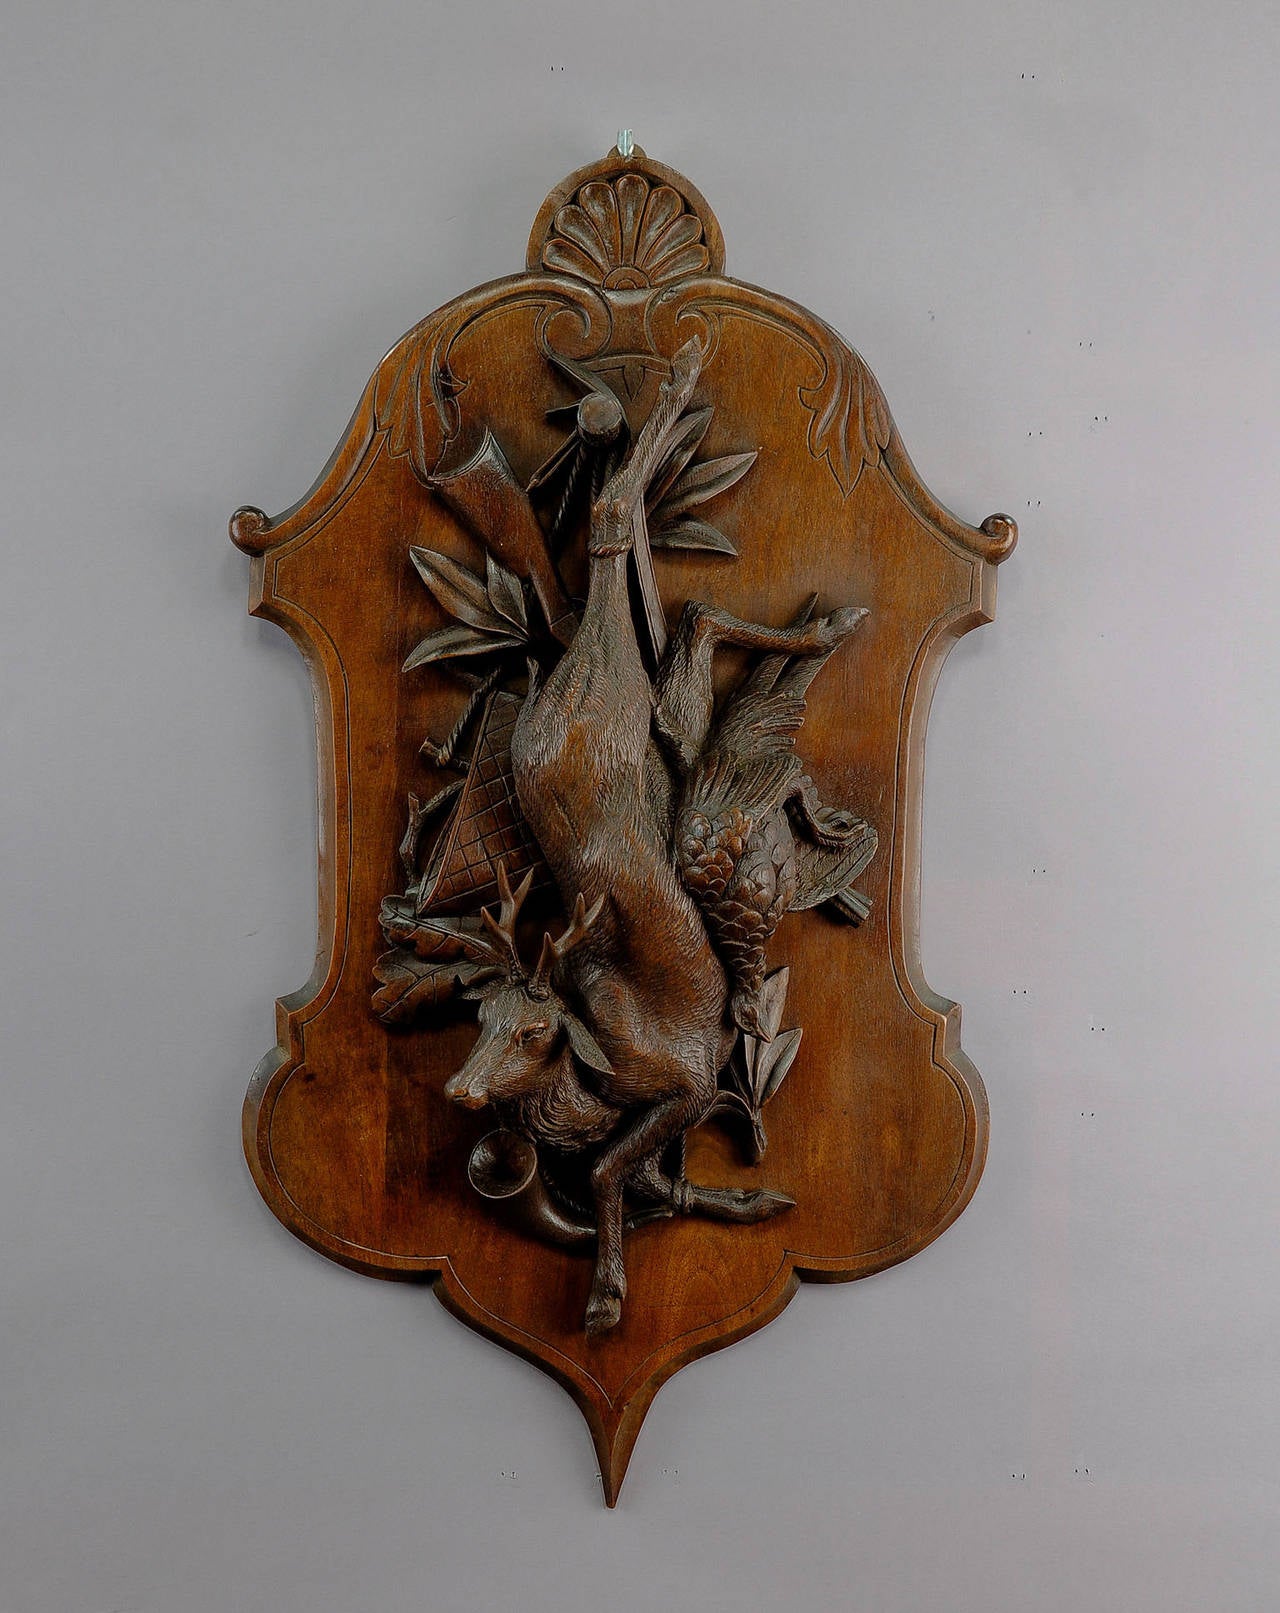 A pair of antique wooden hunting wall plaques with impressive carvings of deer, pheasant and game bag. Executed circa 1900.